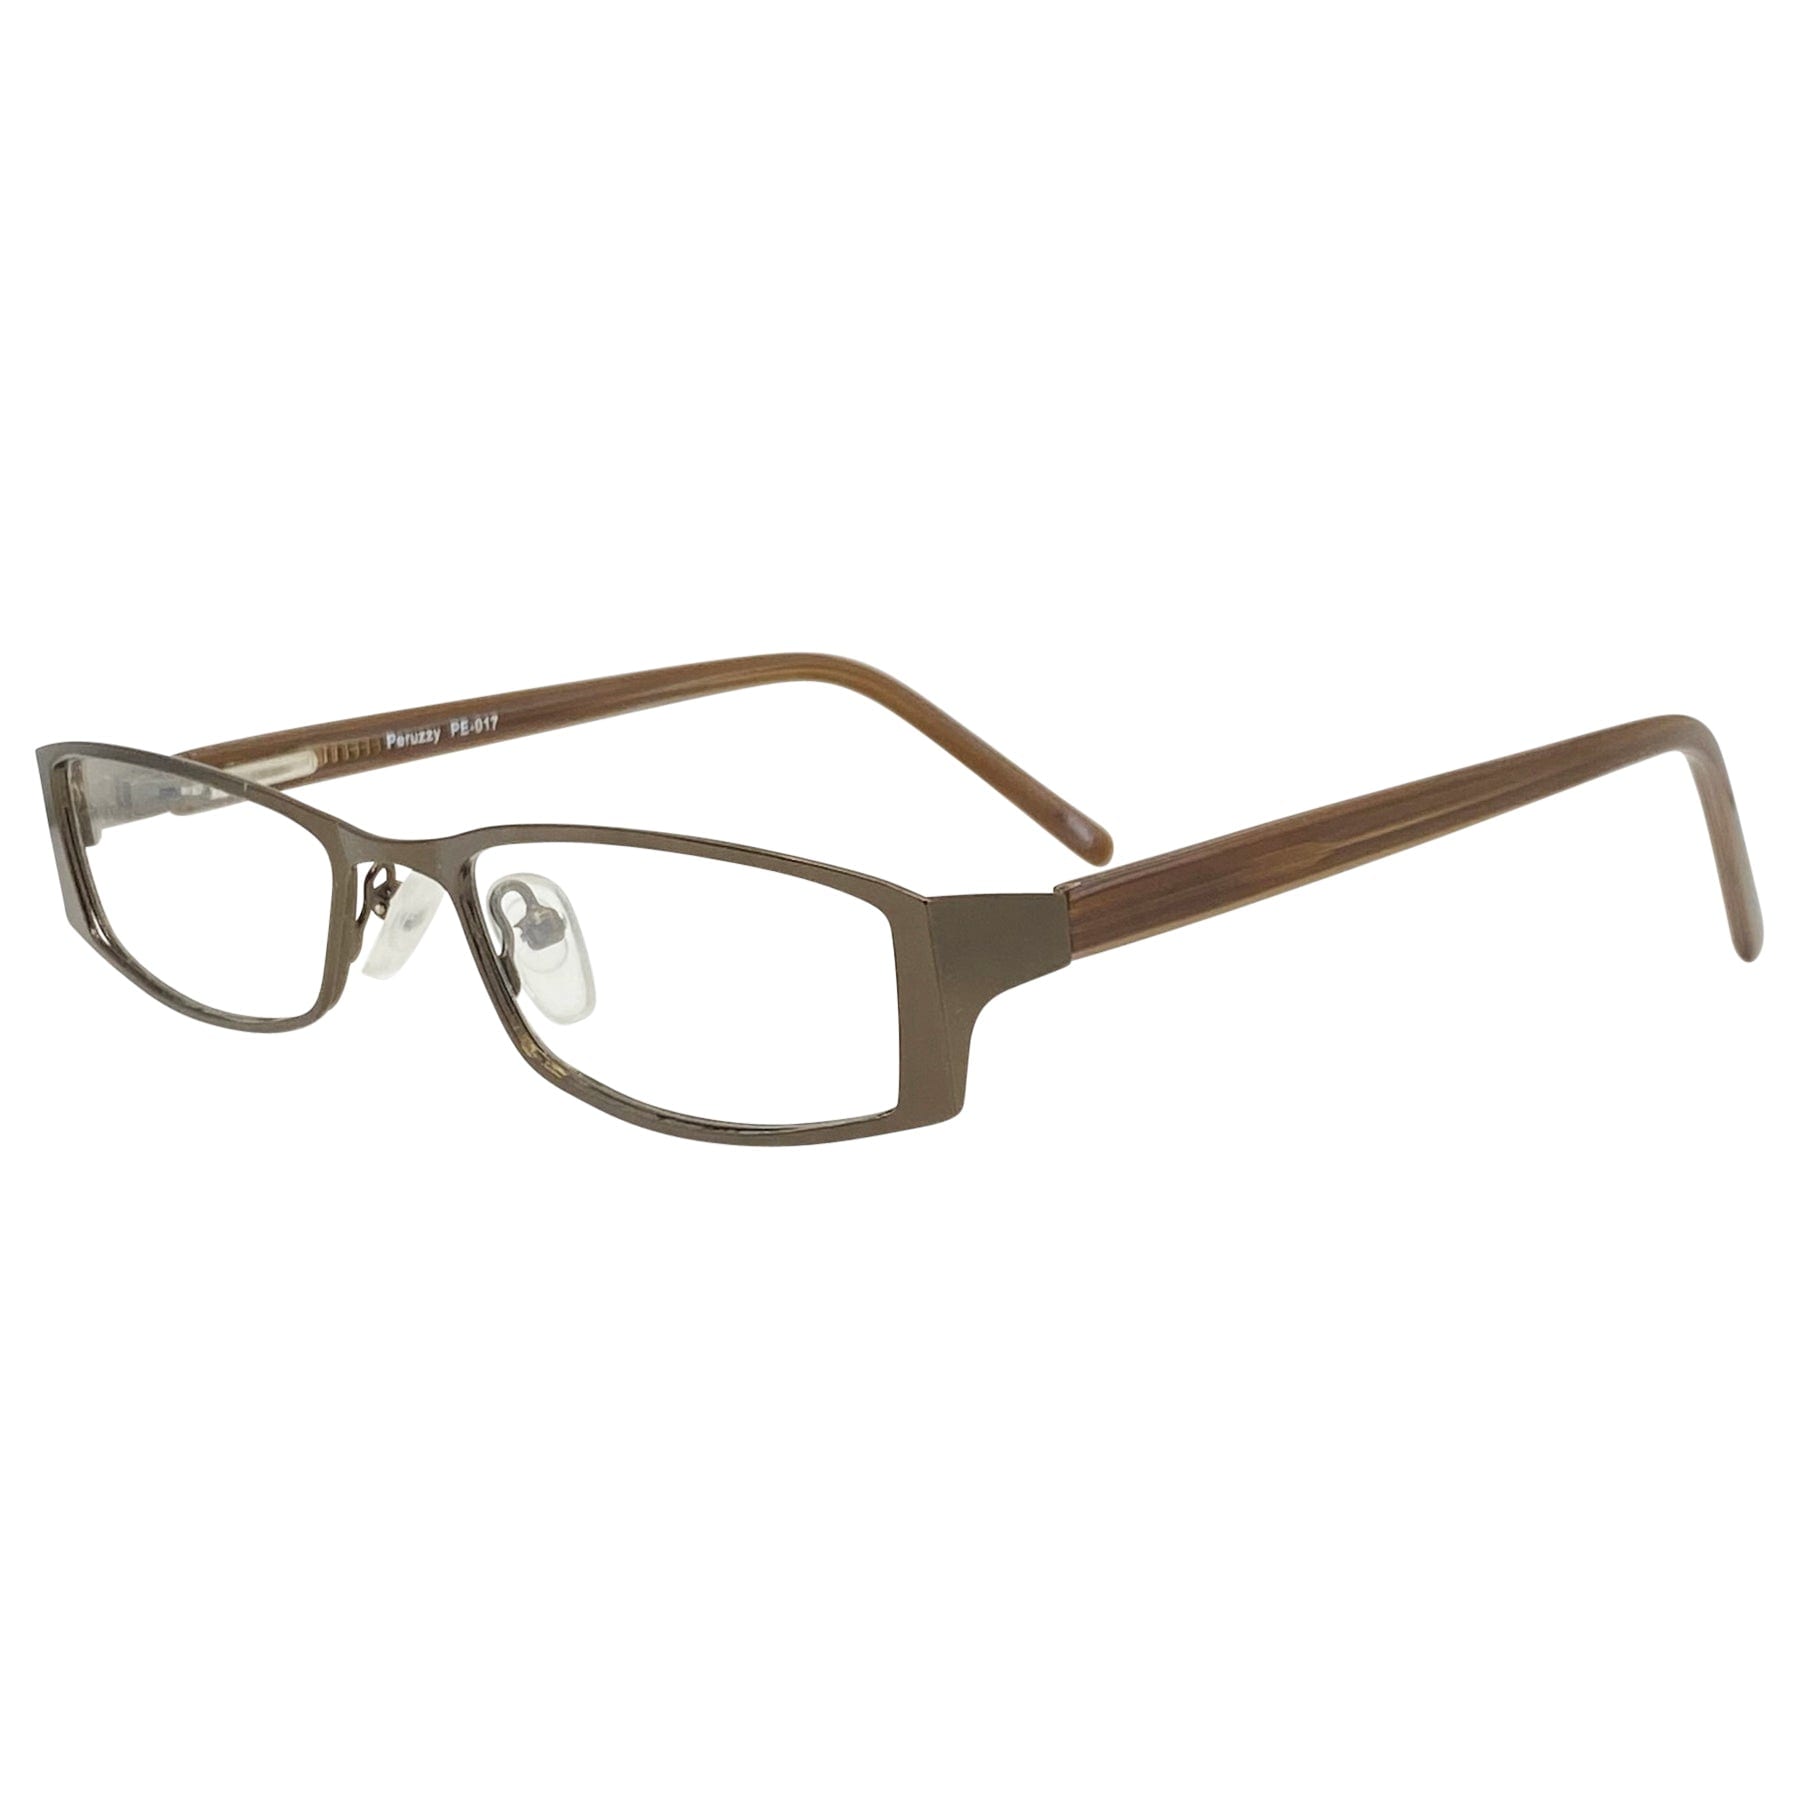 copper metal retro glasses frames with a 90s style 